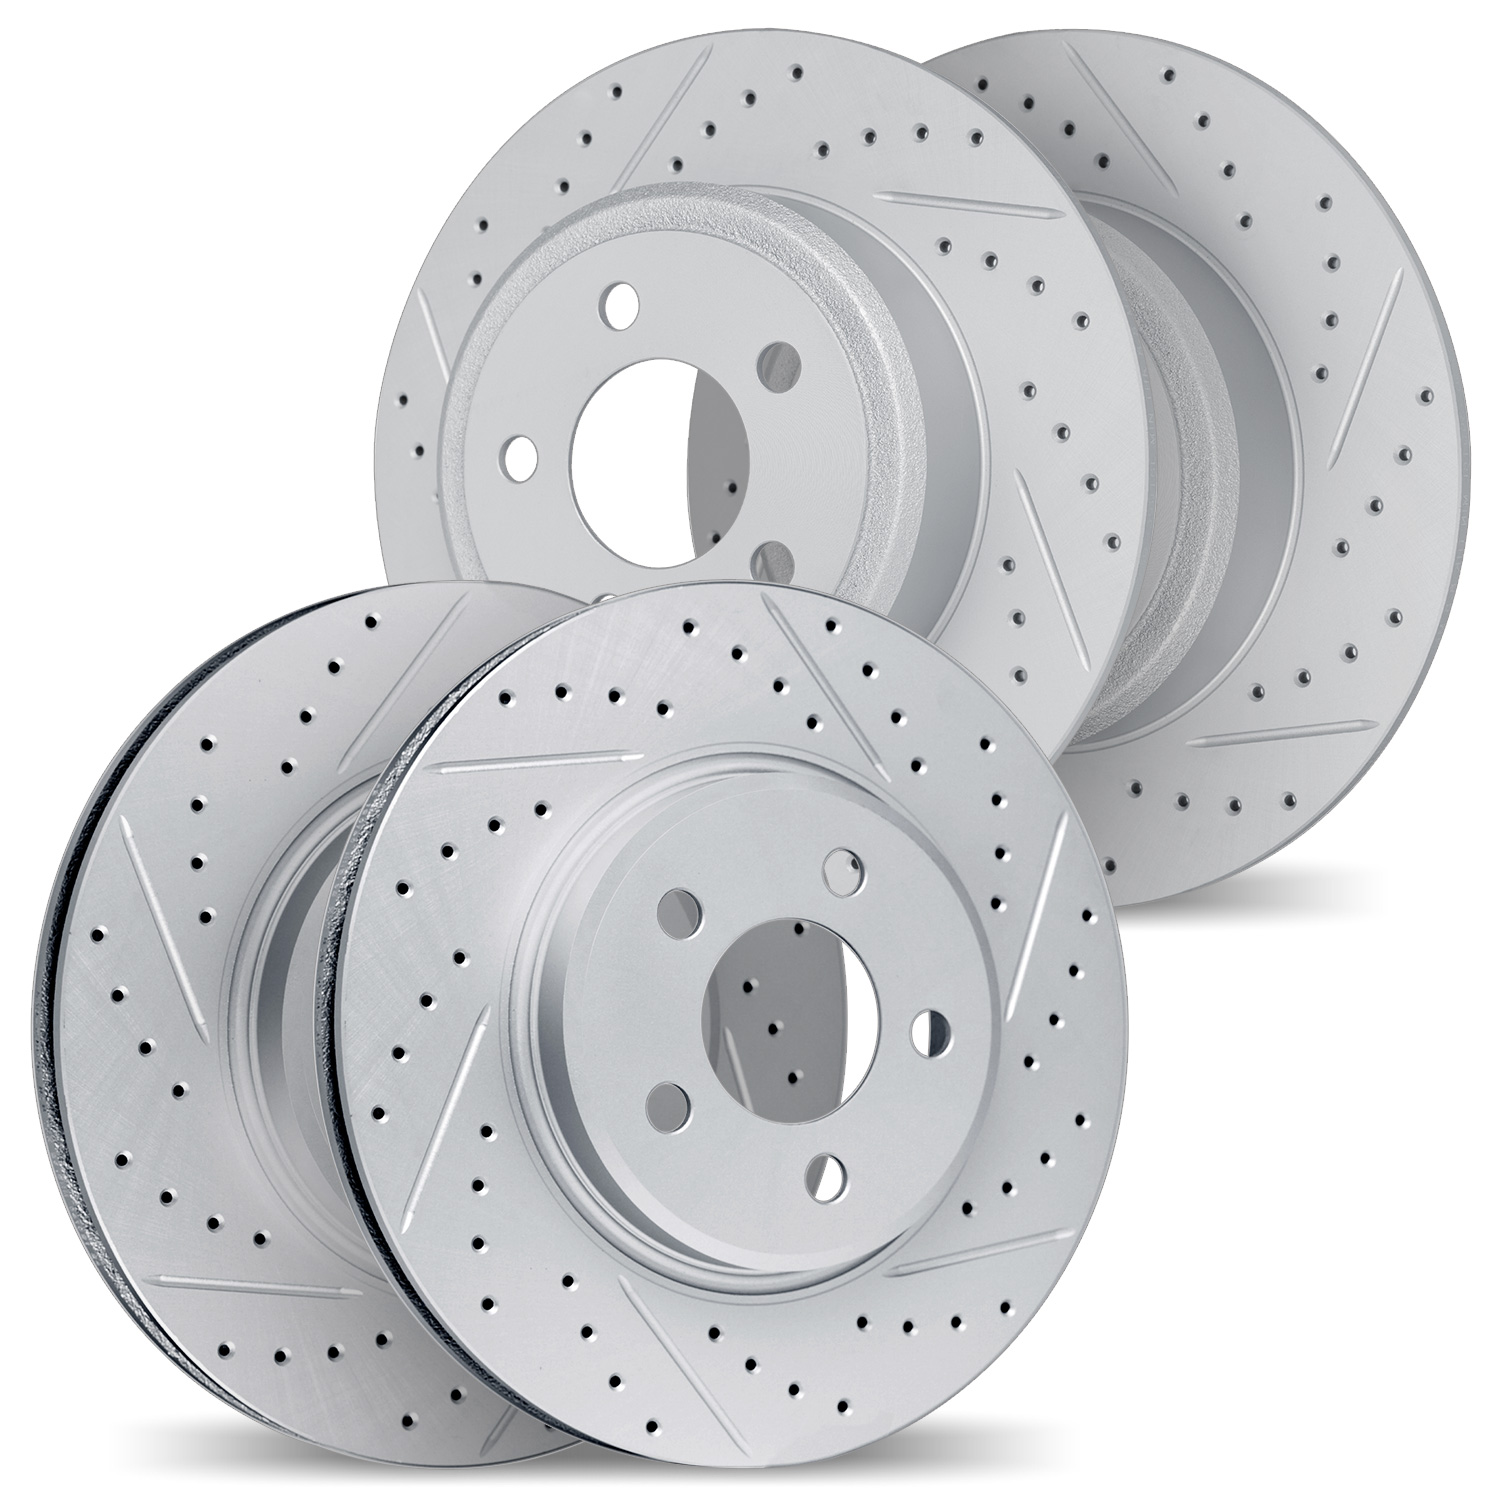 2004-72003 Geoperformance Drilled/Slotted Brake Rotors, 2000-2007 Multiple Makes/Models, Position: Front and Rear